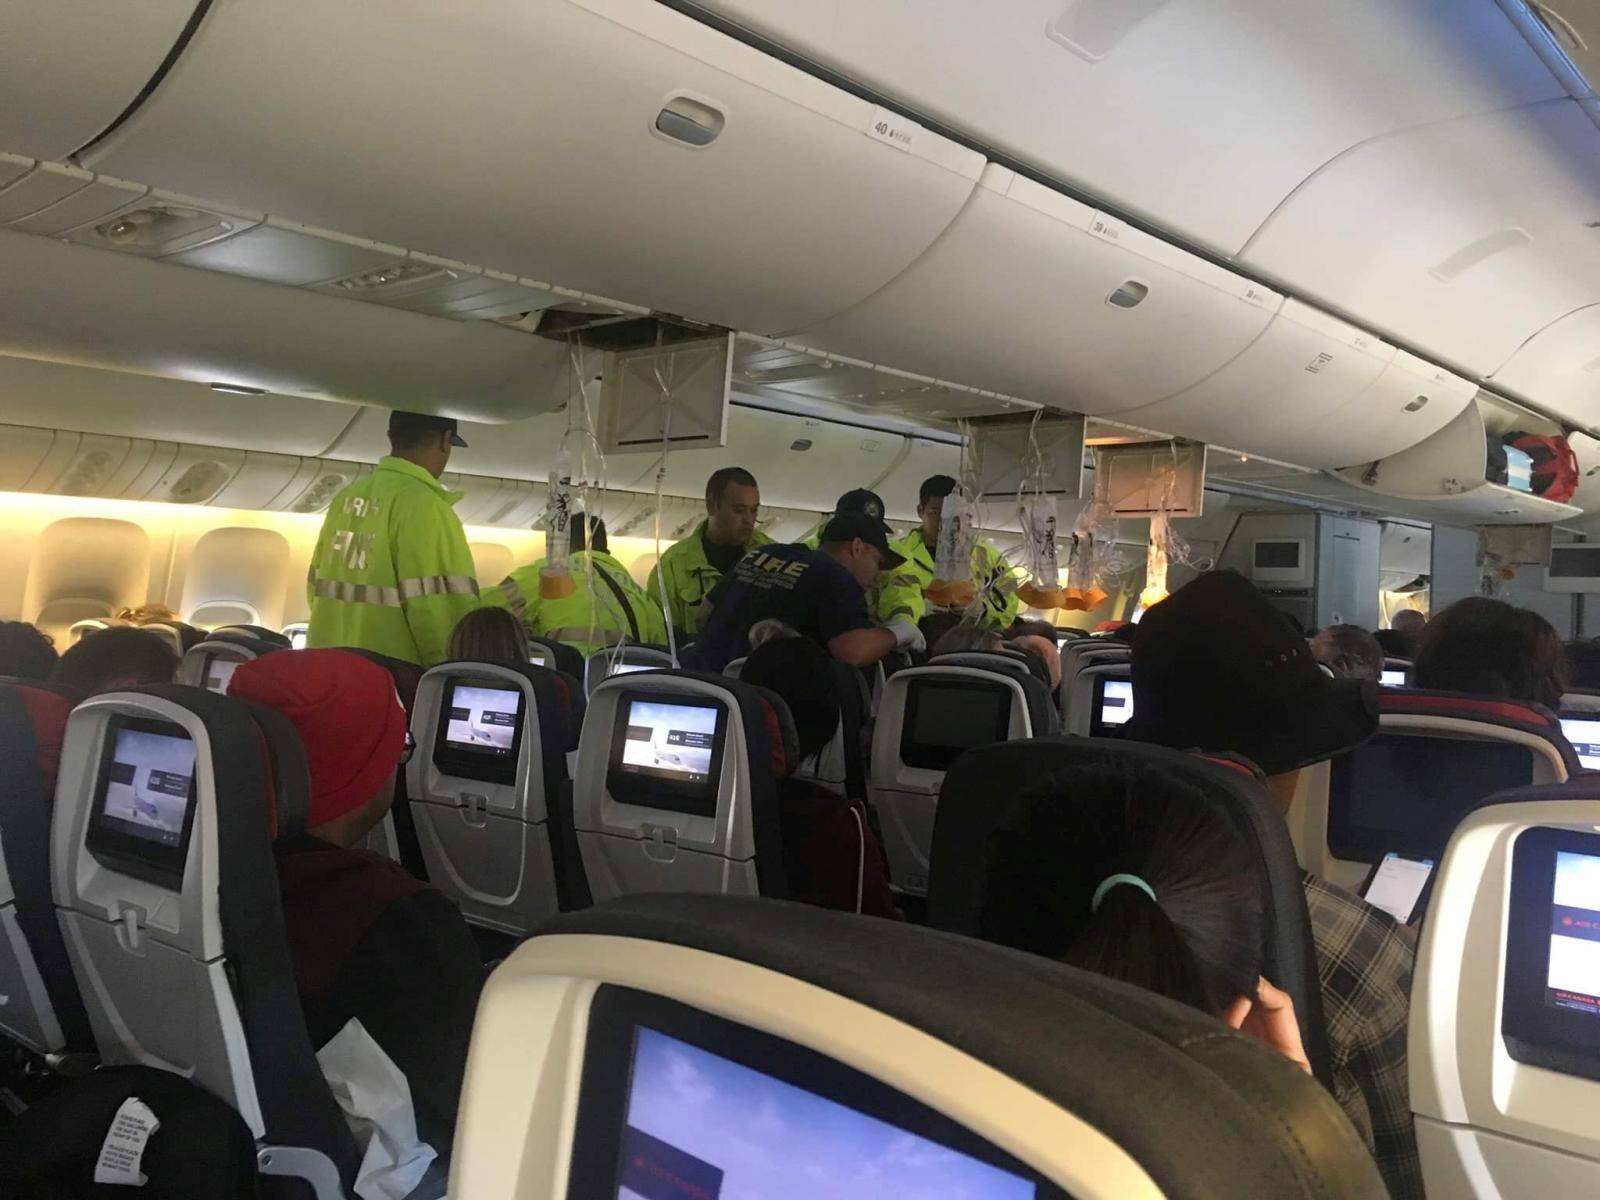 Emergency workers assist passengers of Air Canada AC 33 flight, which diverted to Hawaii after turbulence, at Honolulu airport